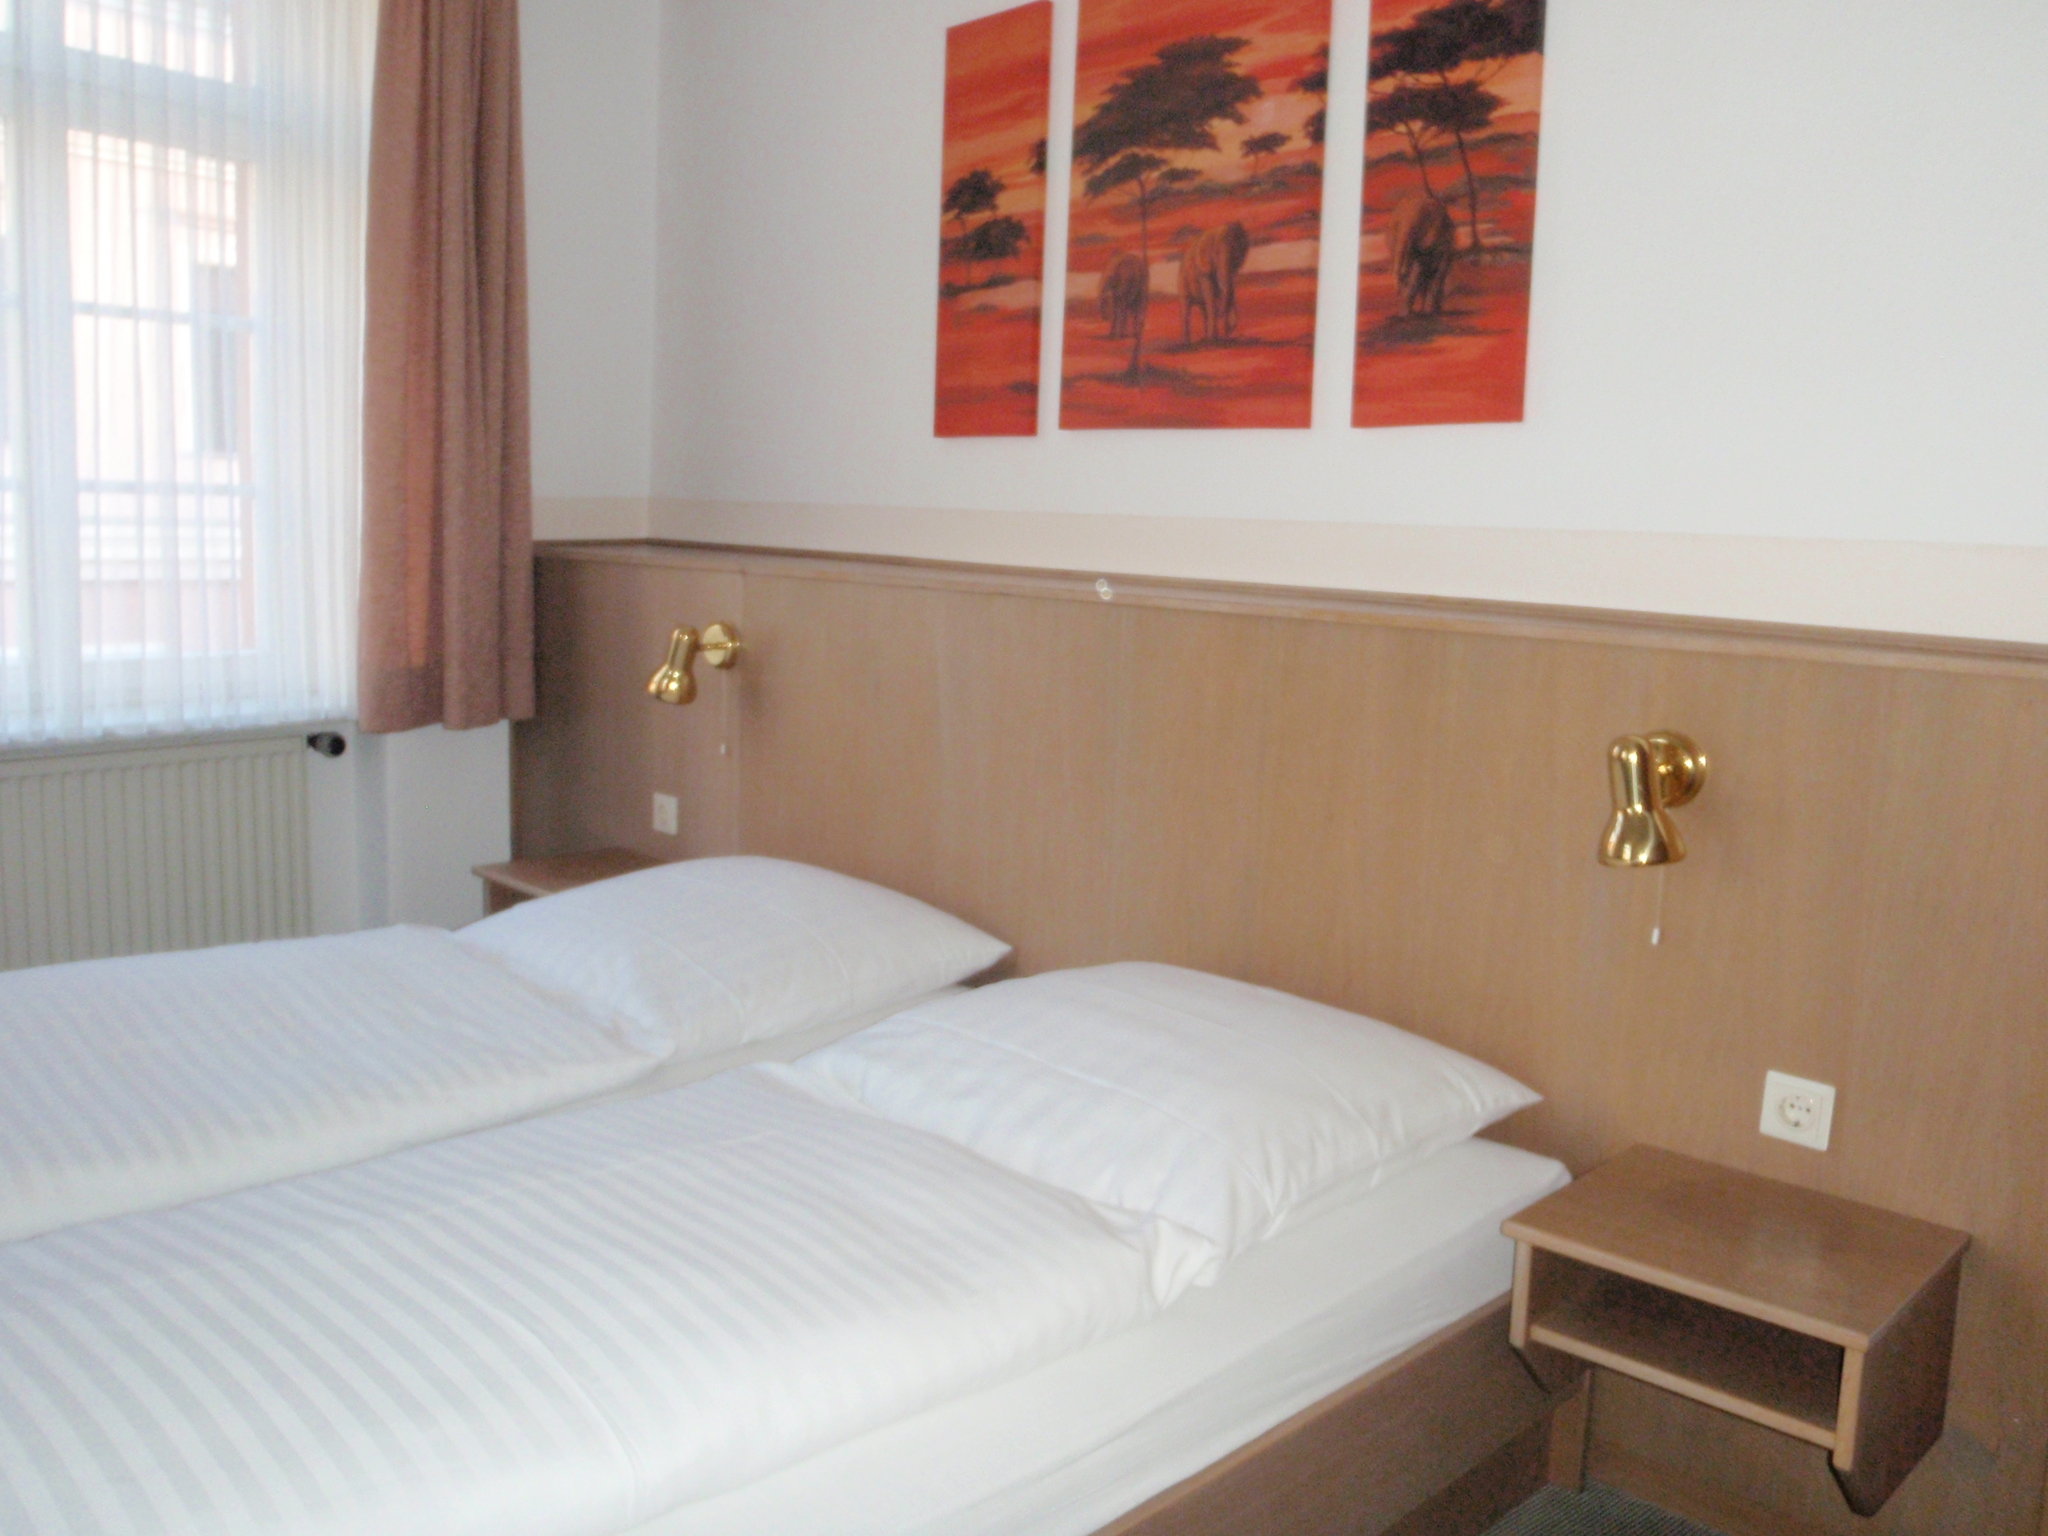 Image of 1A Hostel Zimmer frei